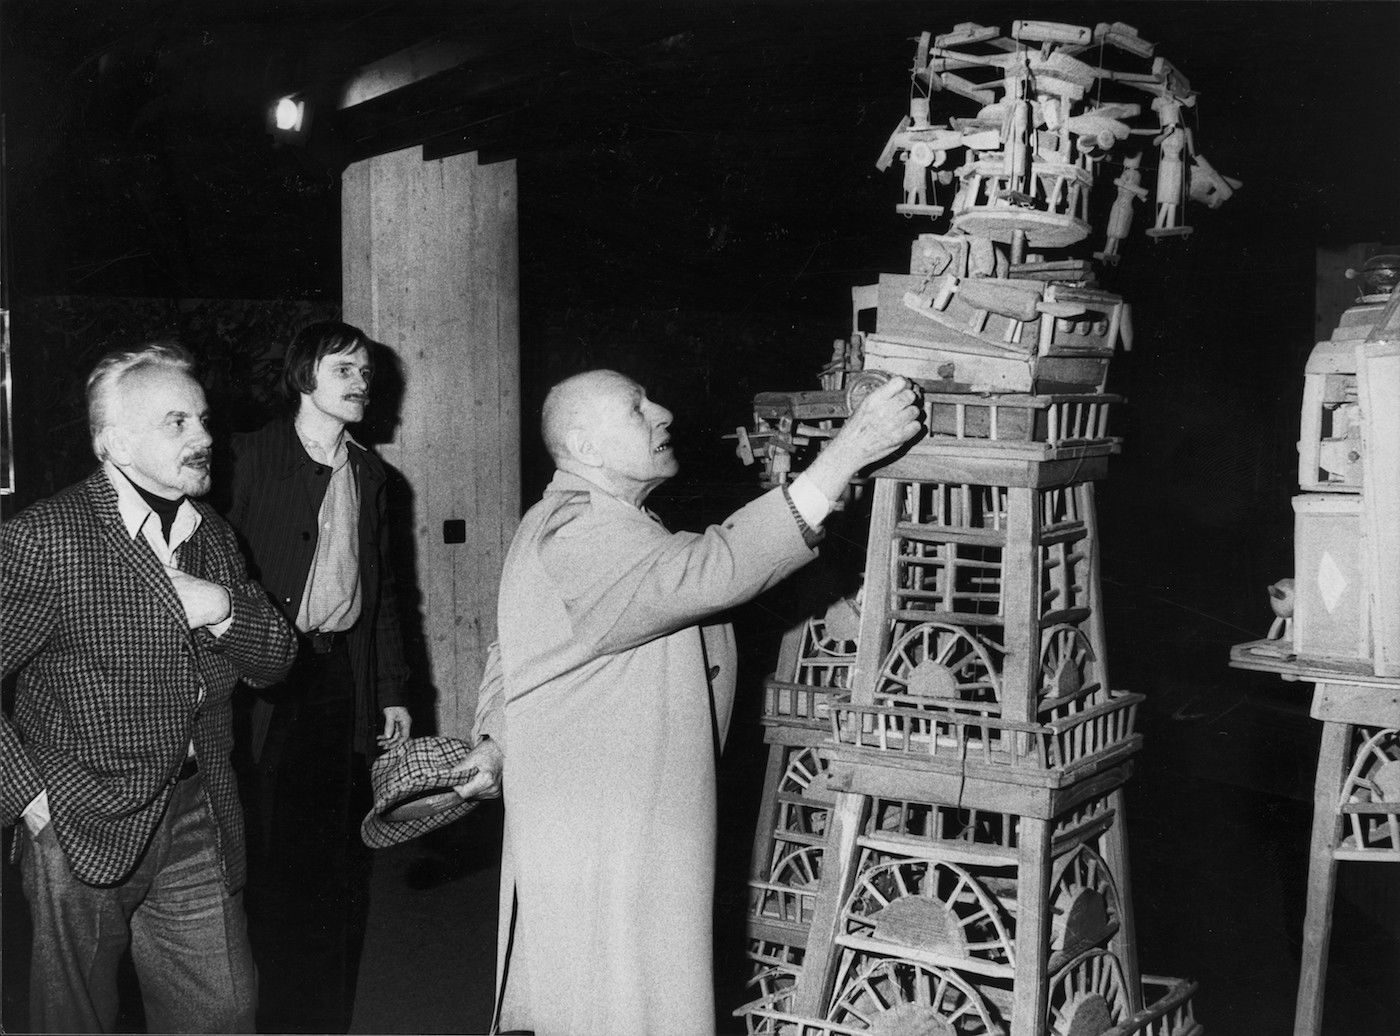 Jean Dubuffet, Michel Thévoz and the artist Slavko Kopac (a collaborator with the Compagnie de l’Art Brut) at the Collection de l’Art Brut in Lausanne, Switzerland,  on the eve of the new museum’s opening, February 1976 (photo by Jean-Jacques Laeser, courtesy of Collection de l’Art Brut)